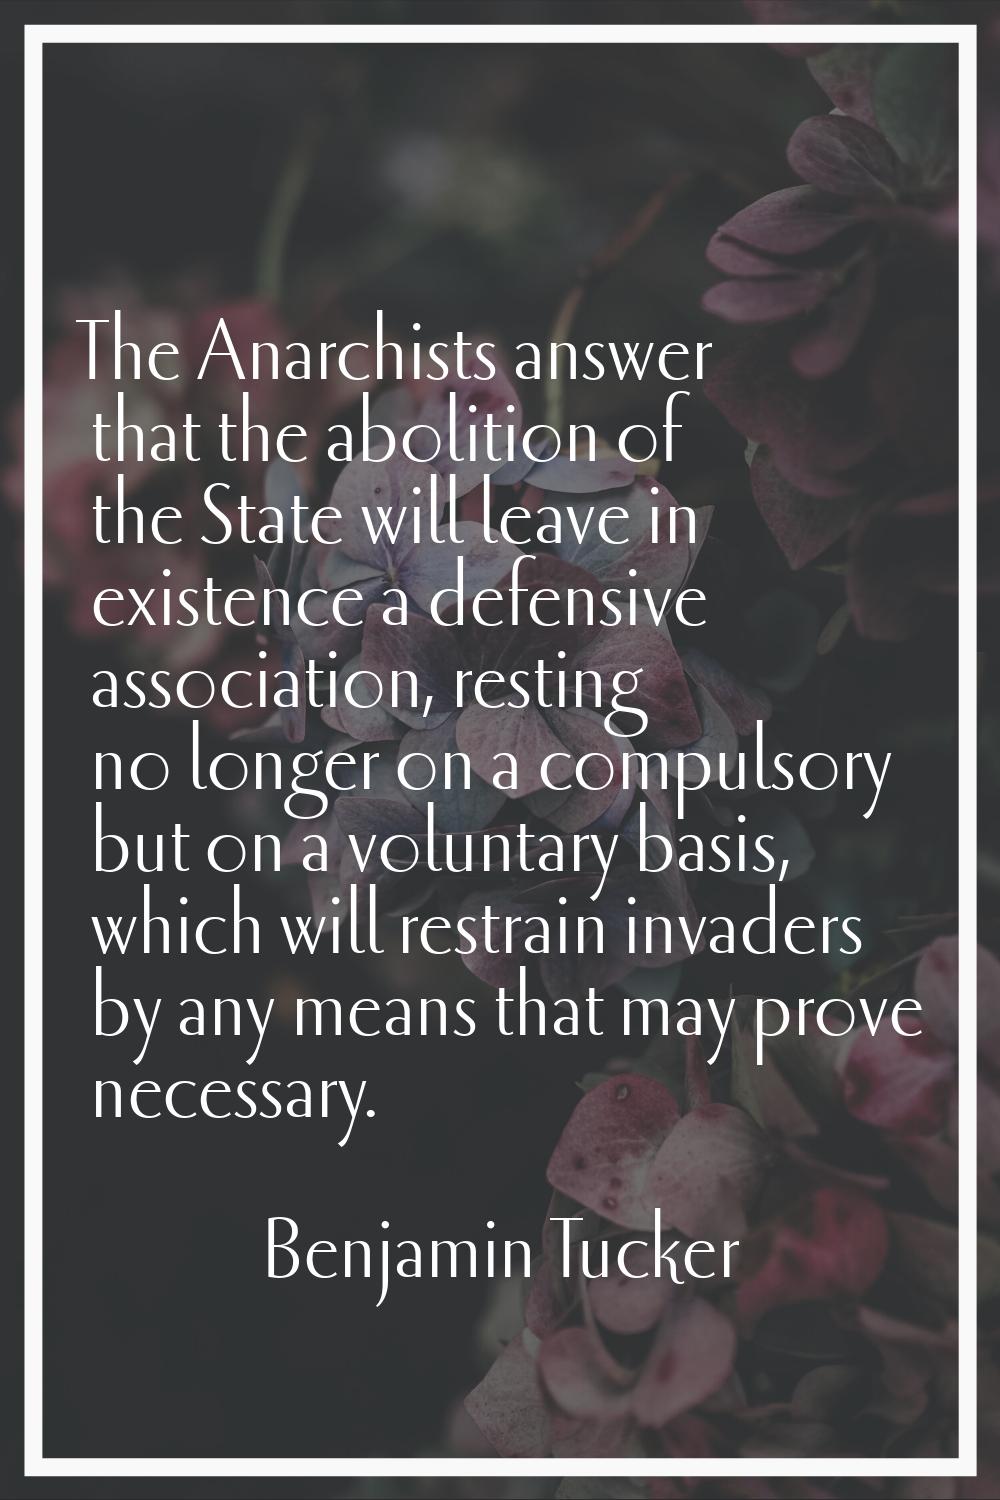 The Anarchists answer that the abolition of the State will leave in existence a defensive associati